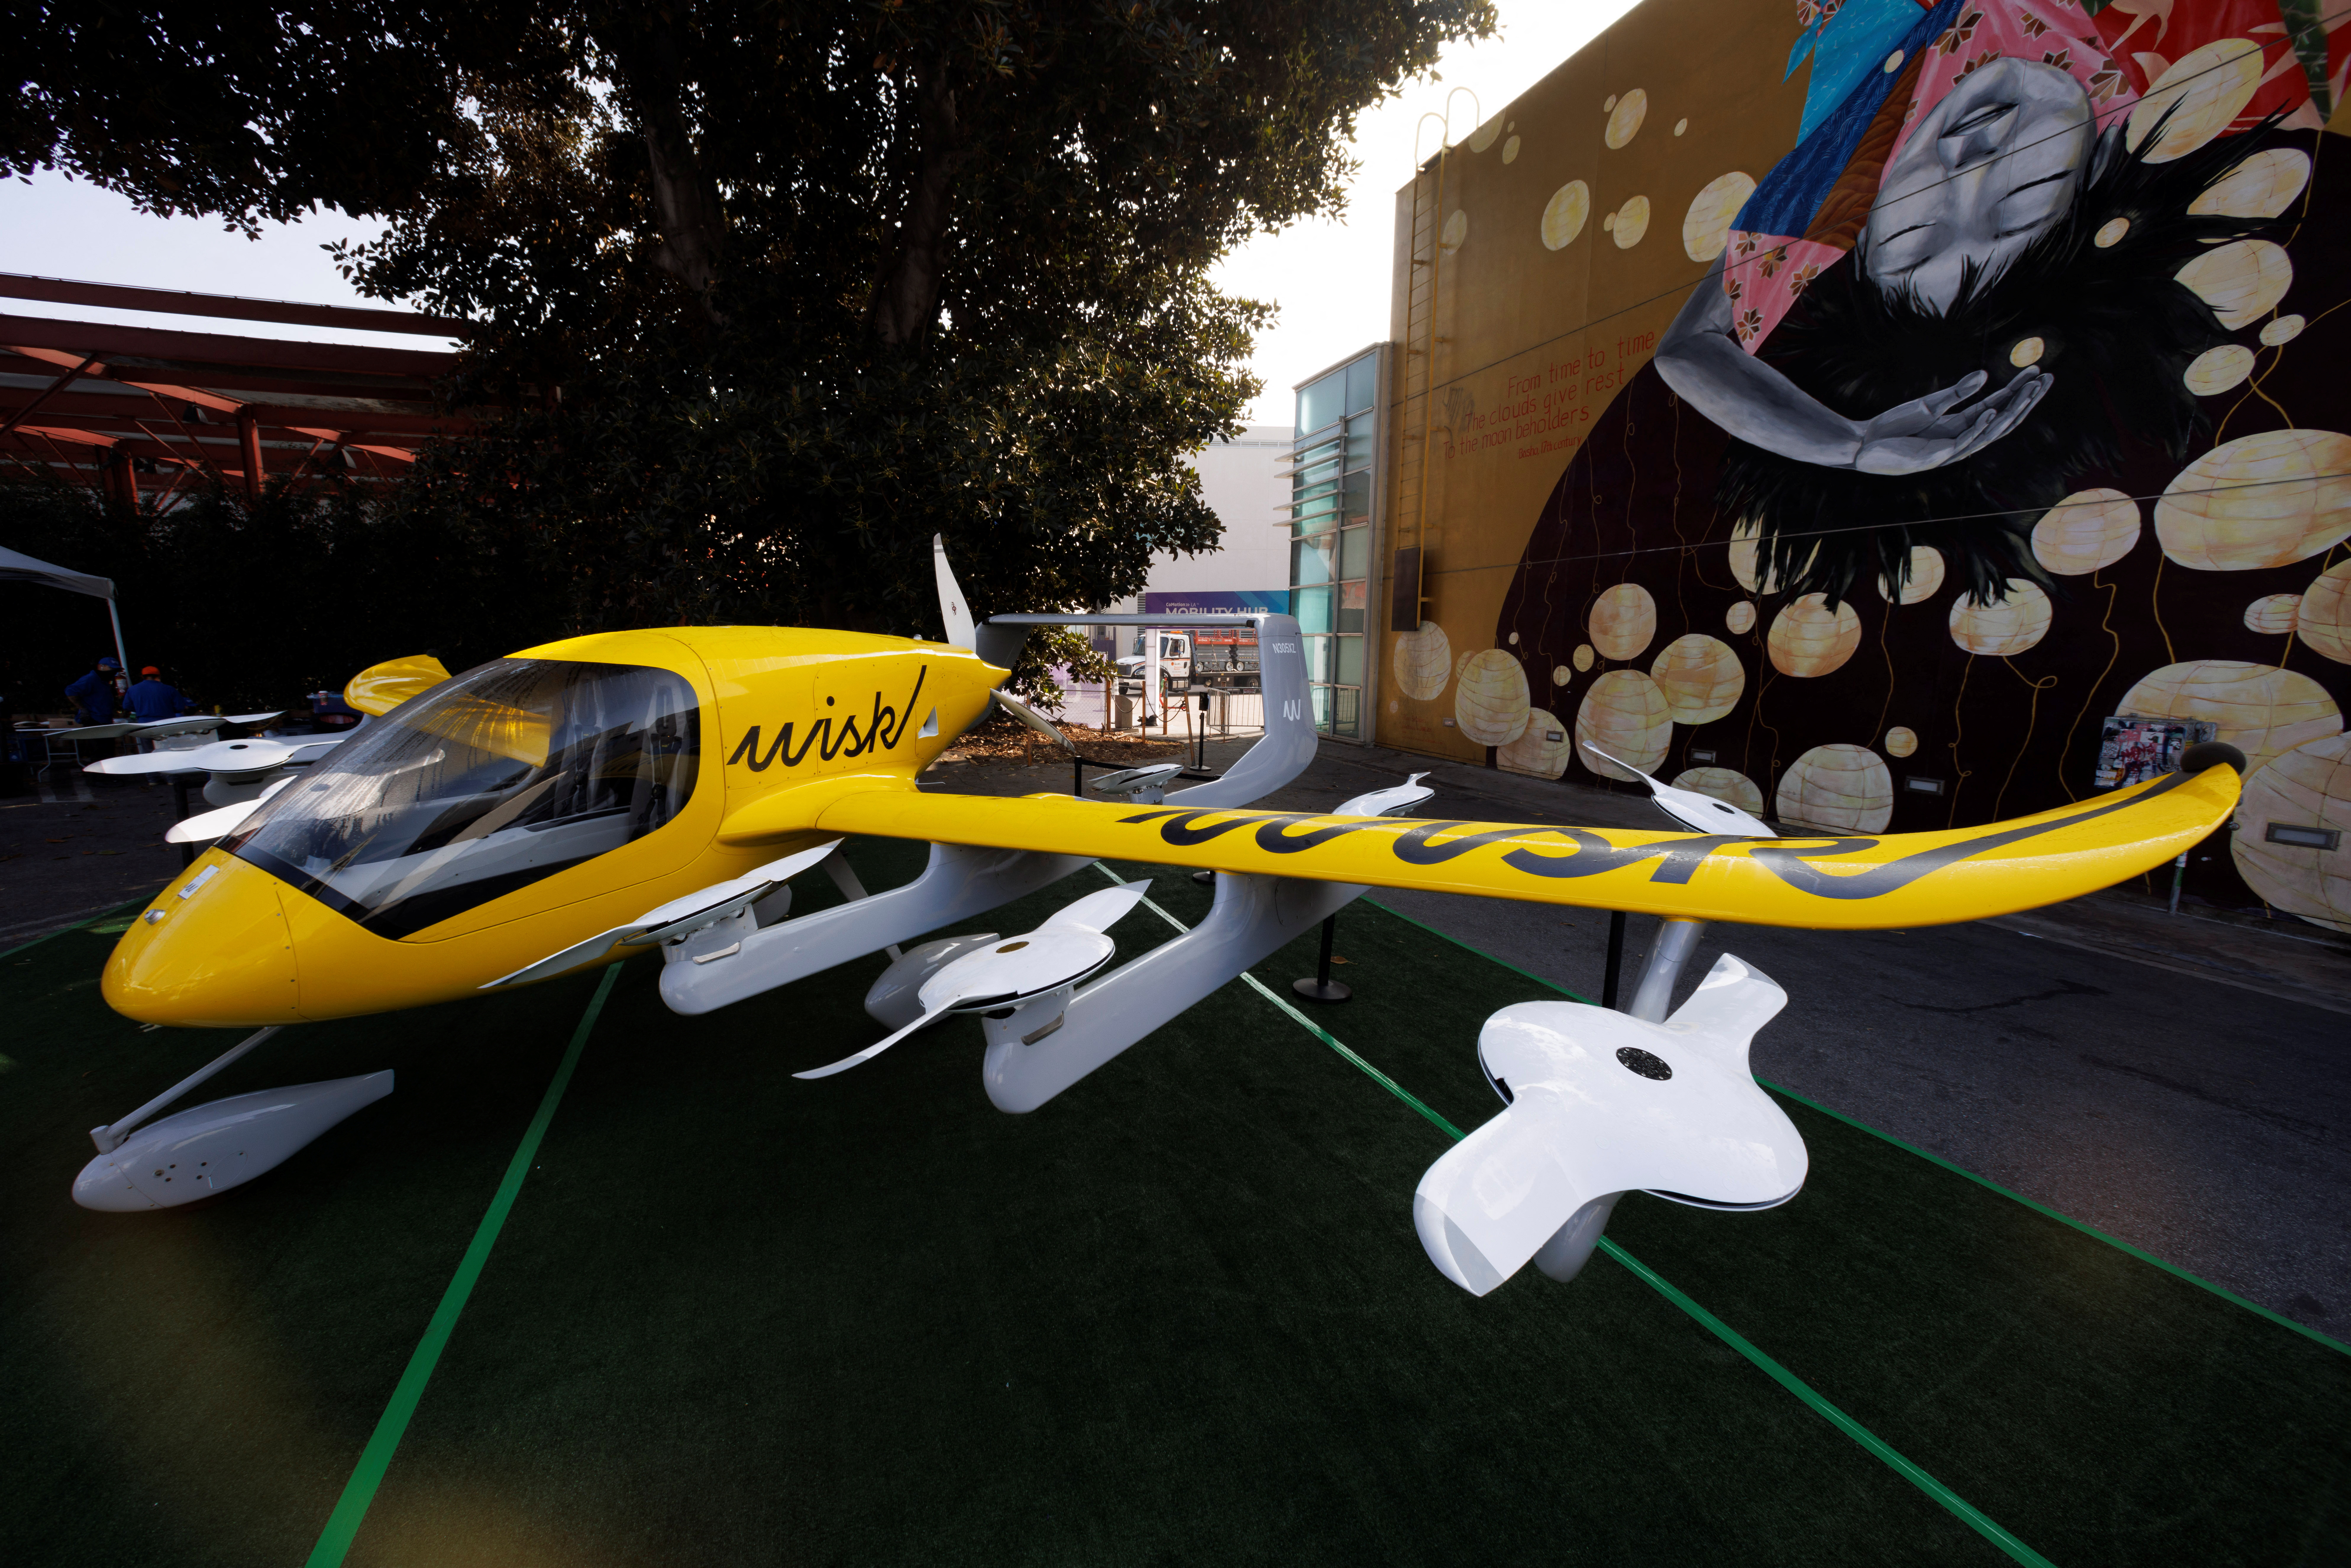 Wisk aircraft shown at CoMotion LA  conference in Los Angeles